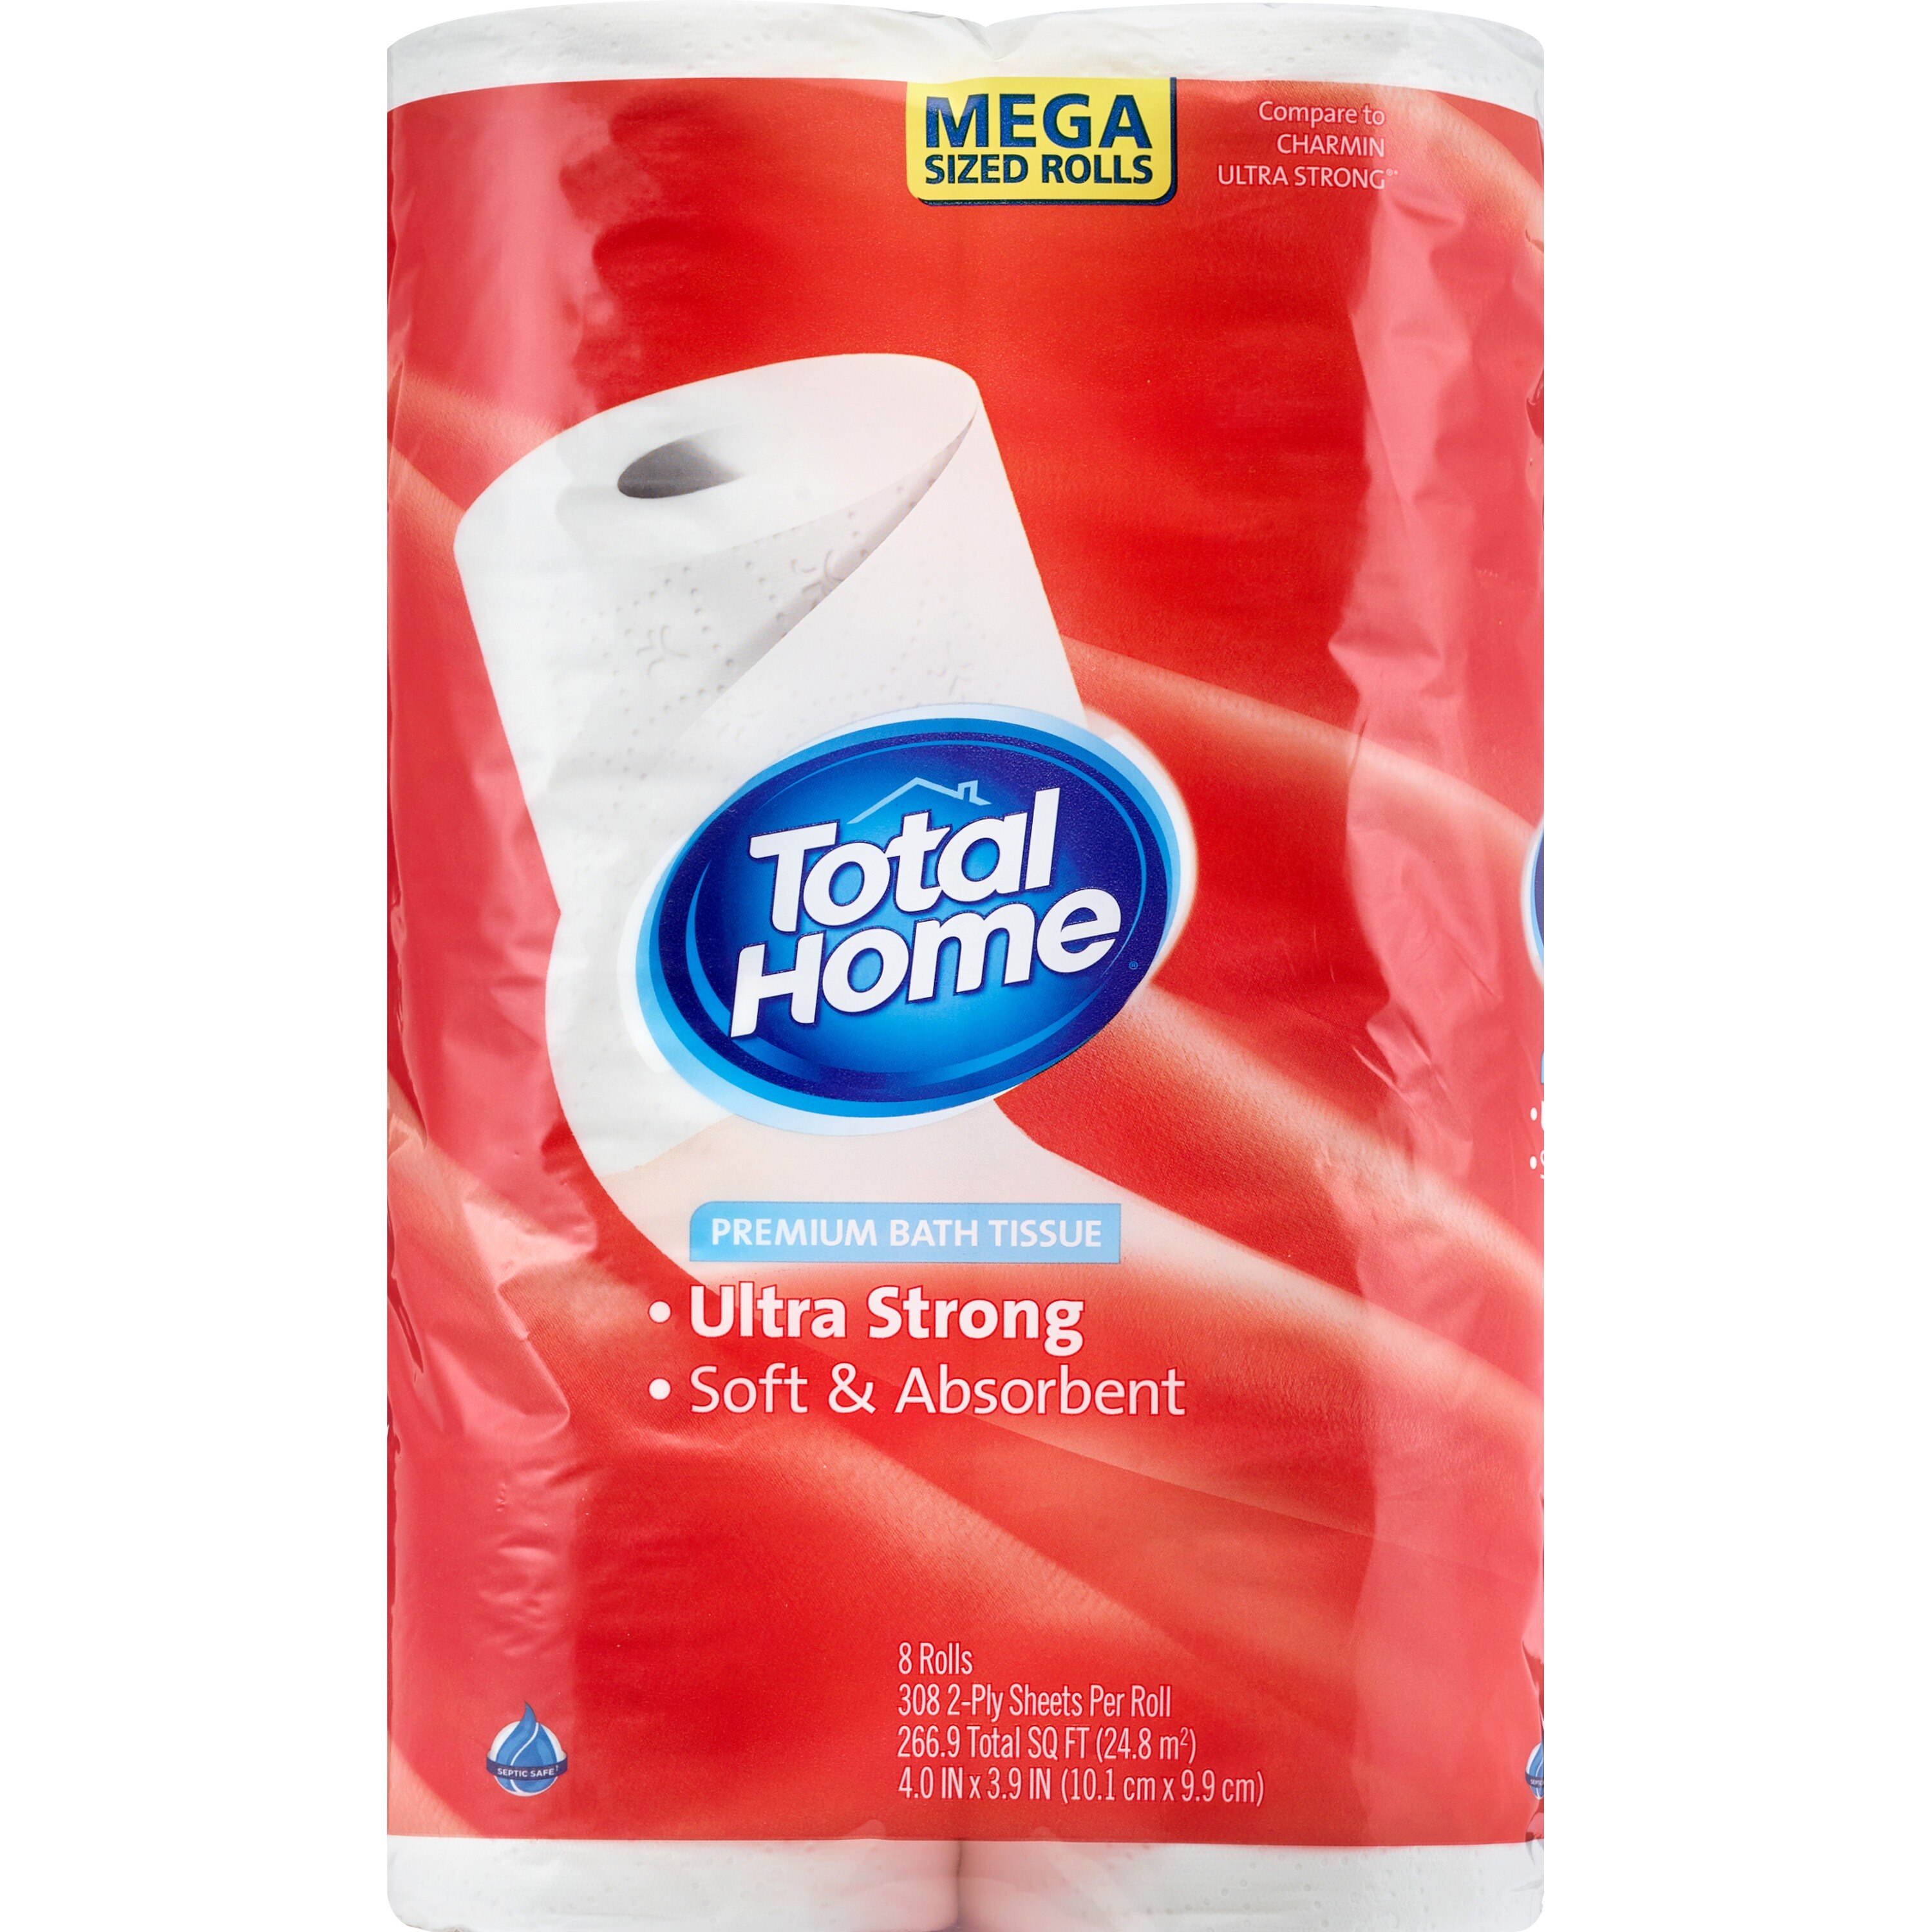 Total Home Premium Bath Tissue, Ultra Strong Mega Sized Rolls, 8/Pack